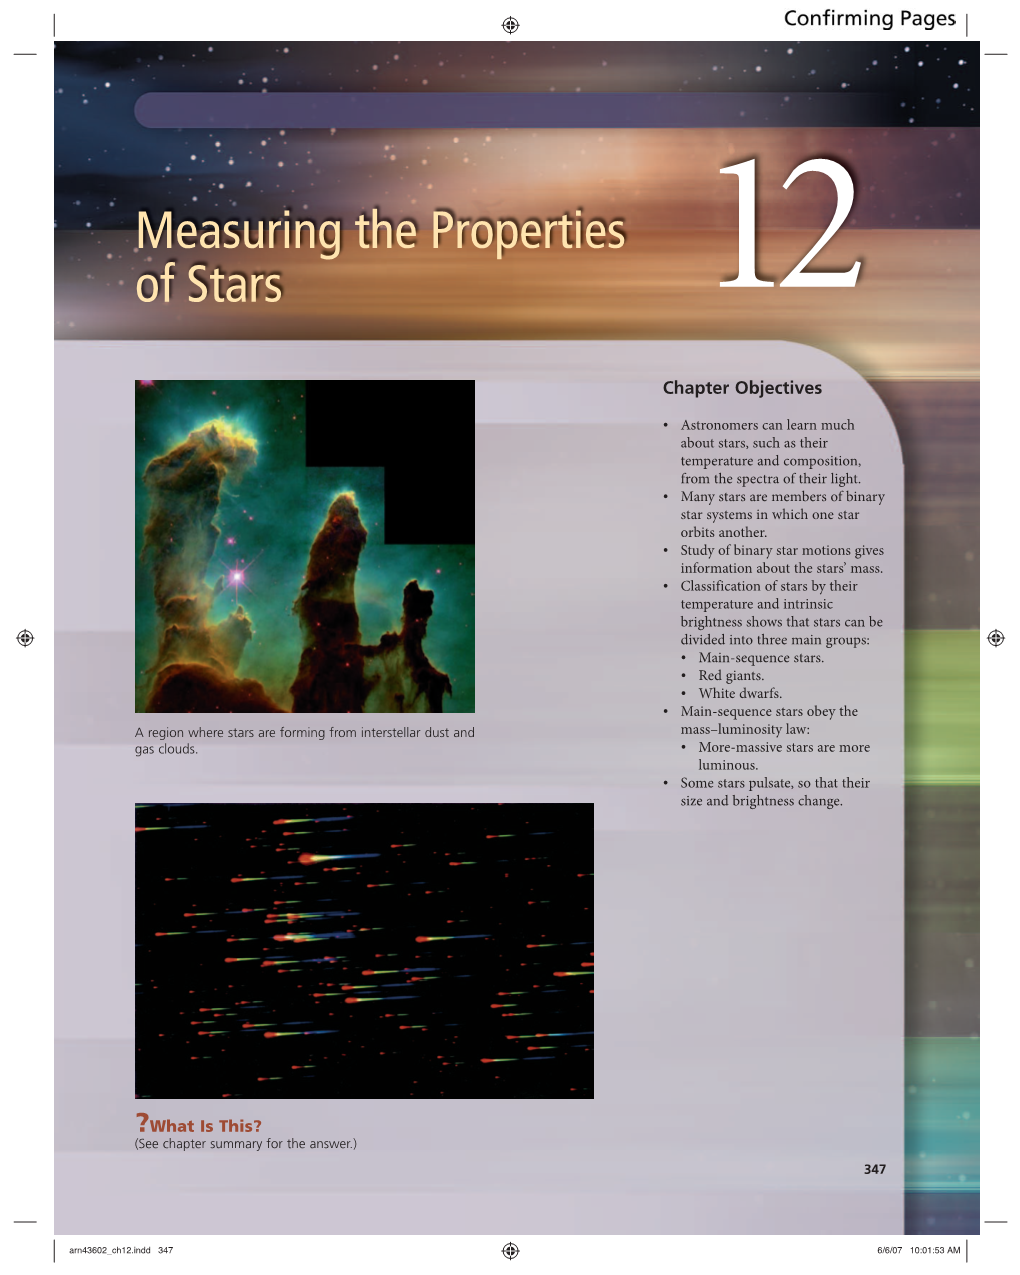 Measuring the Properties of Stars 12